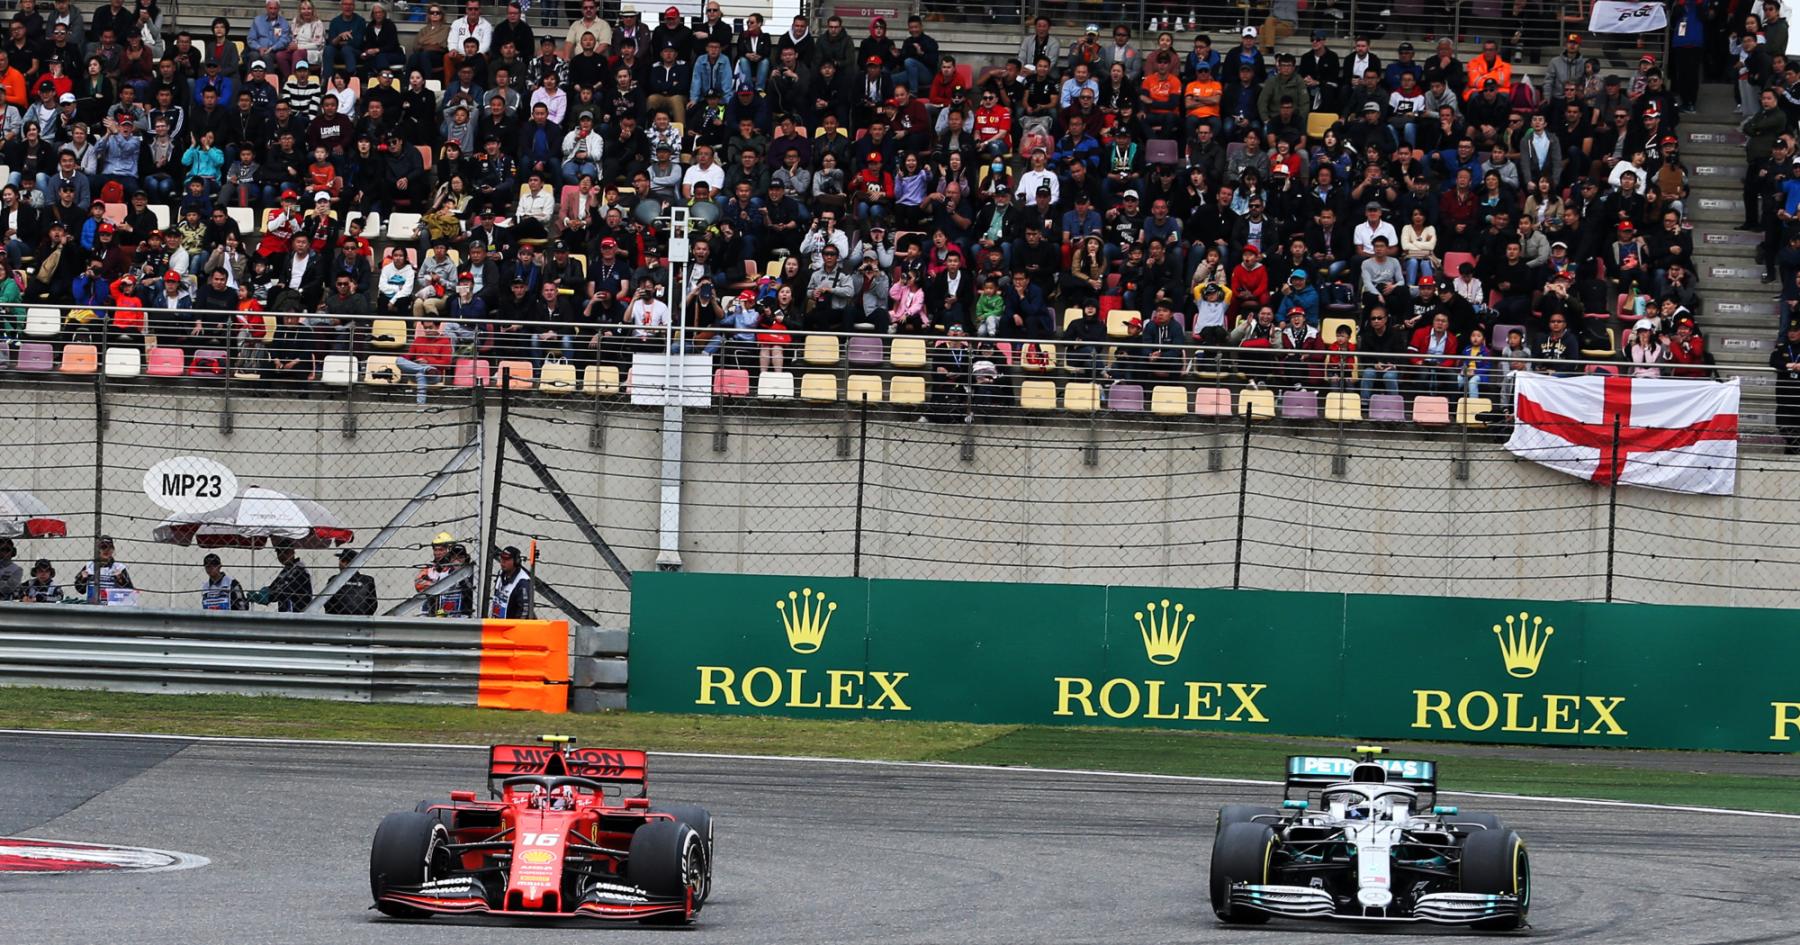 Weather reports suggest changeable conditions for F1's return to China